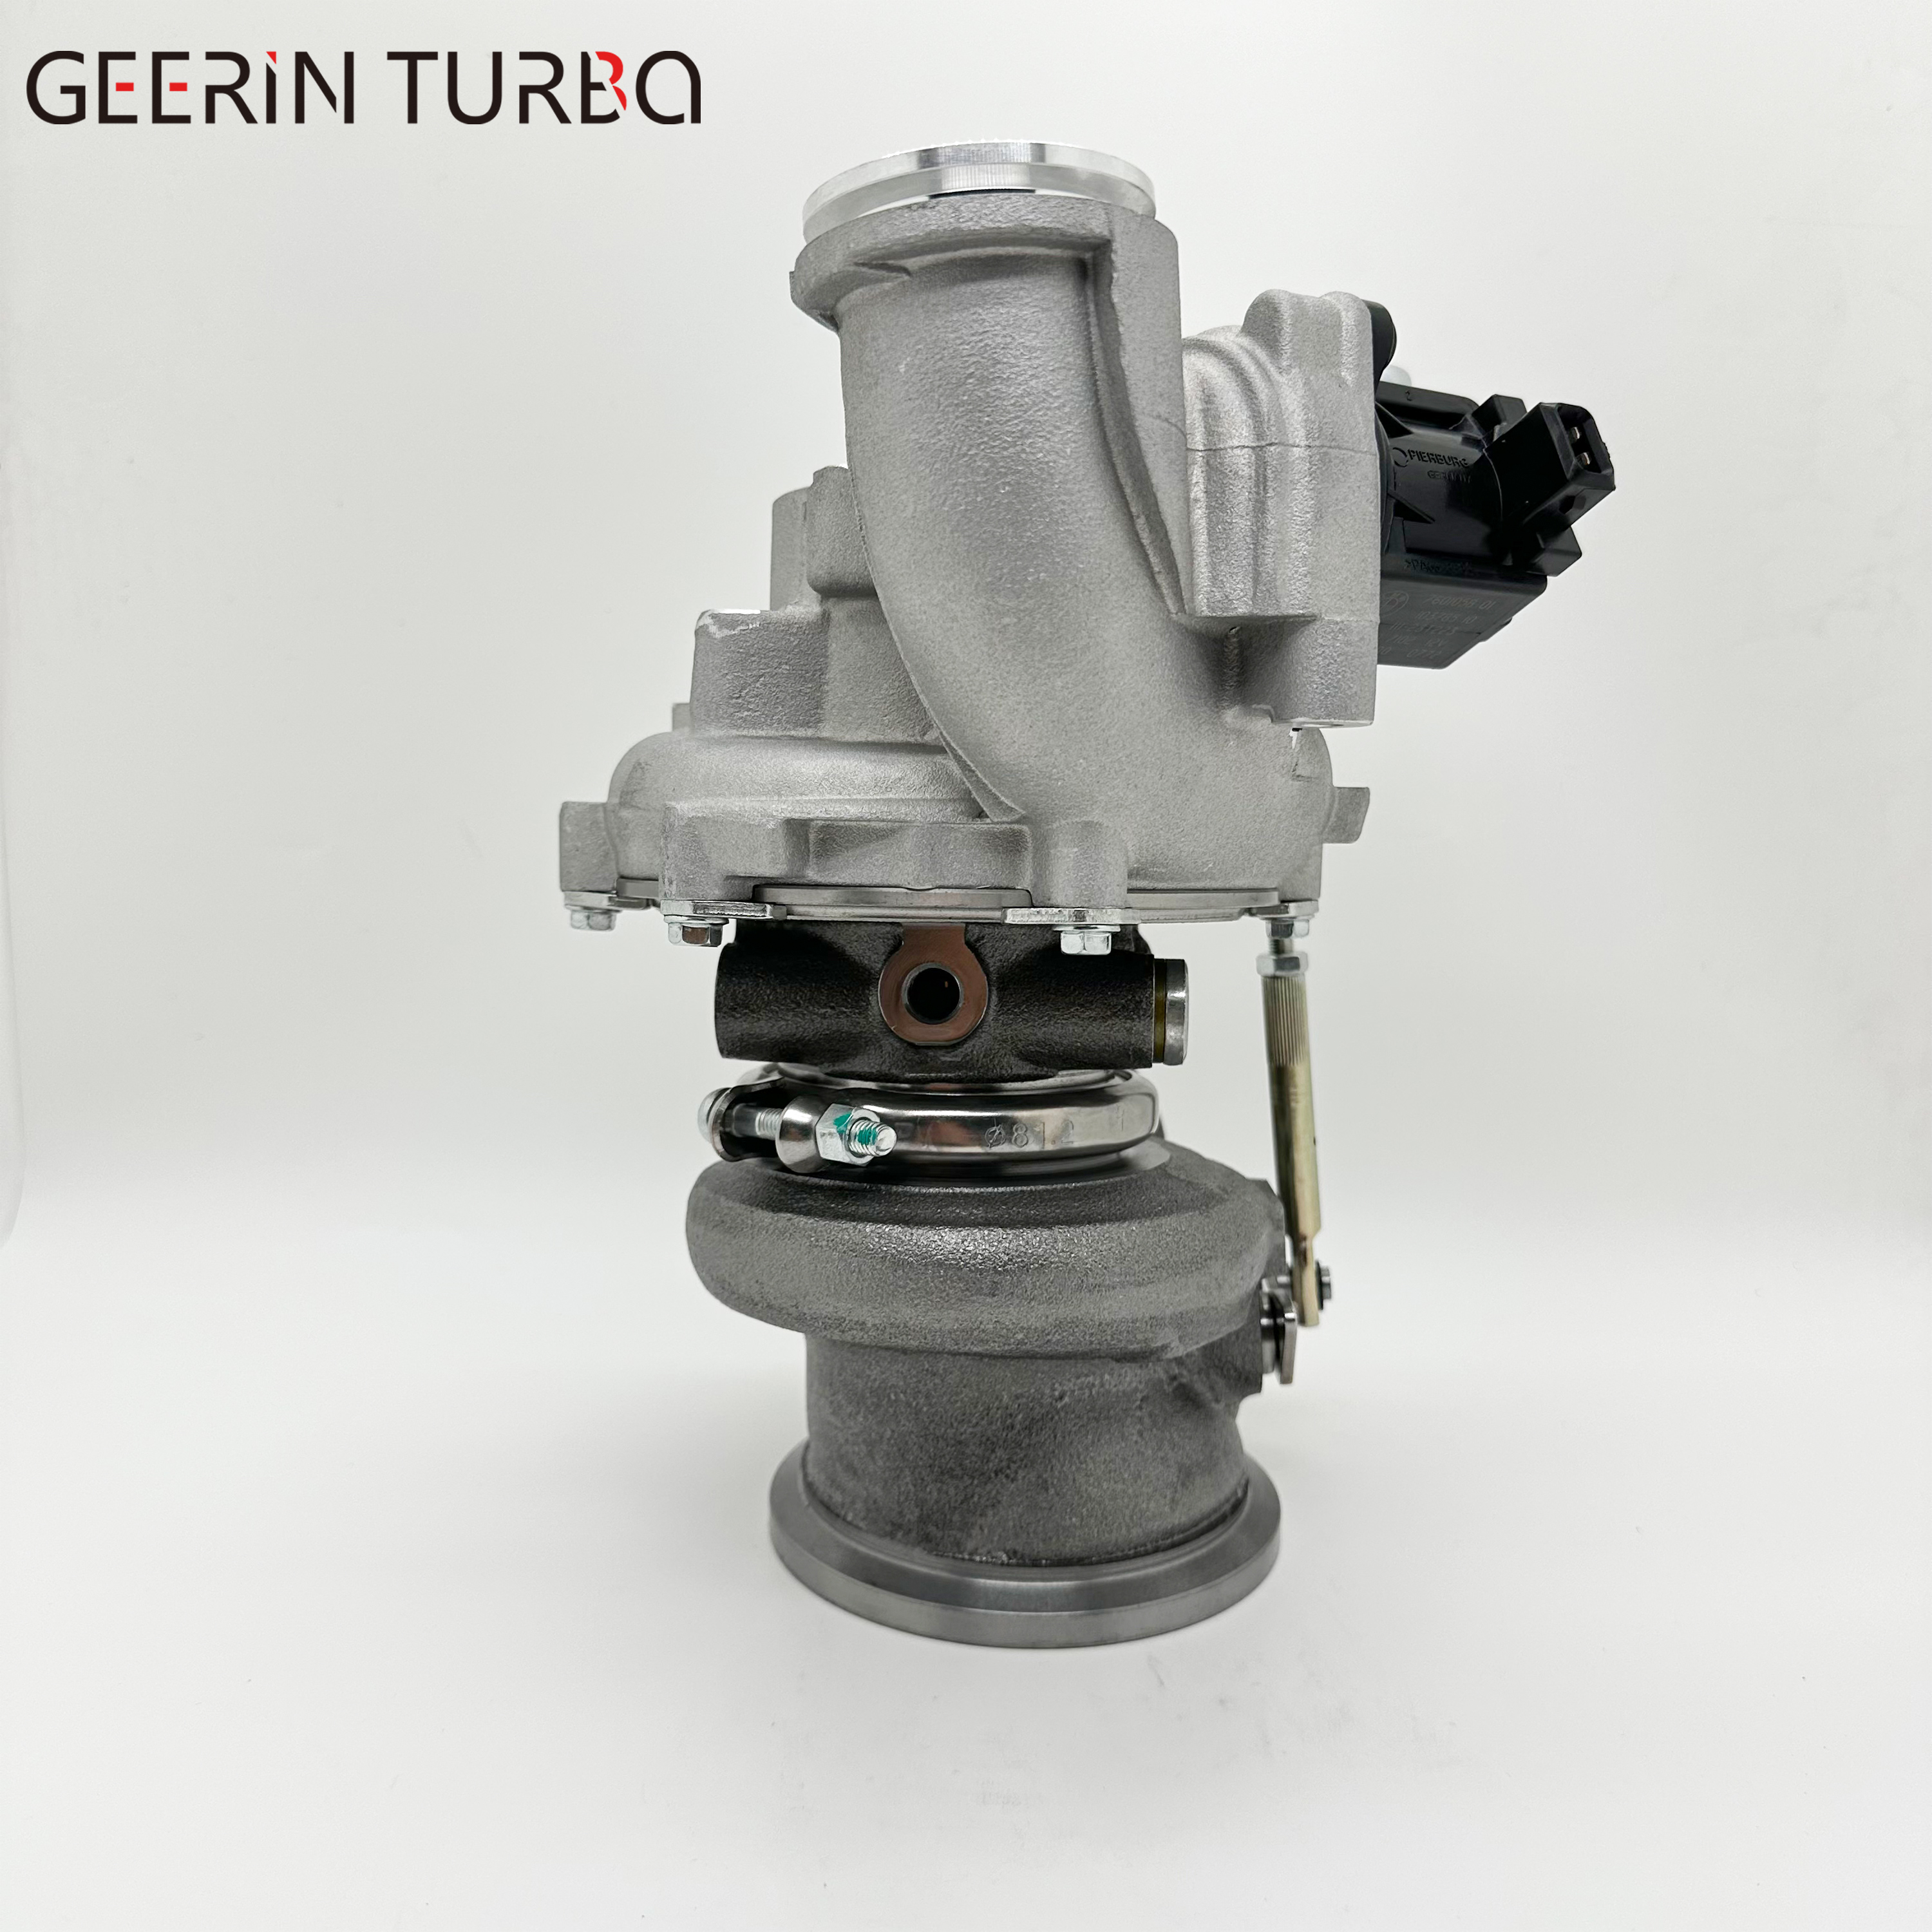 Turbocharger Manufacture MGT2256S 769155-5015S 793647-5009S 821719-5002S 821719-5003S Full Turbo Assy For BMW 4.4 X6